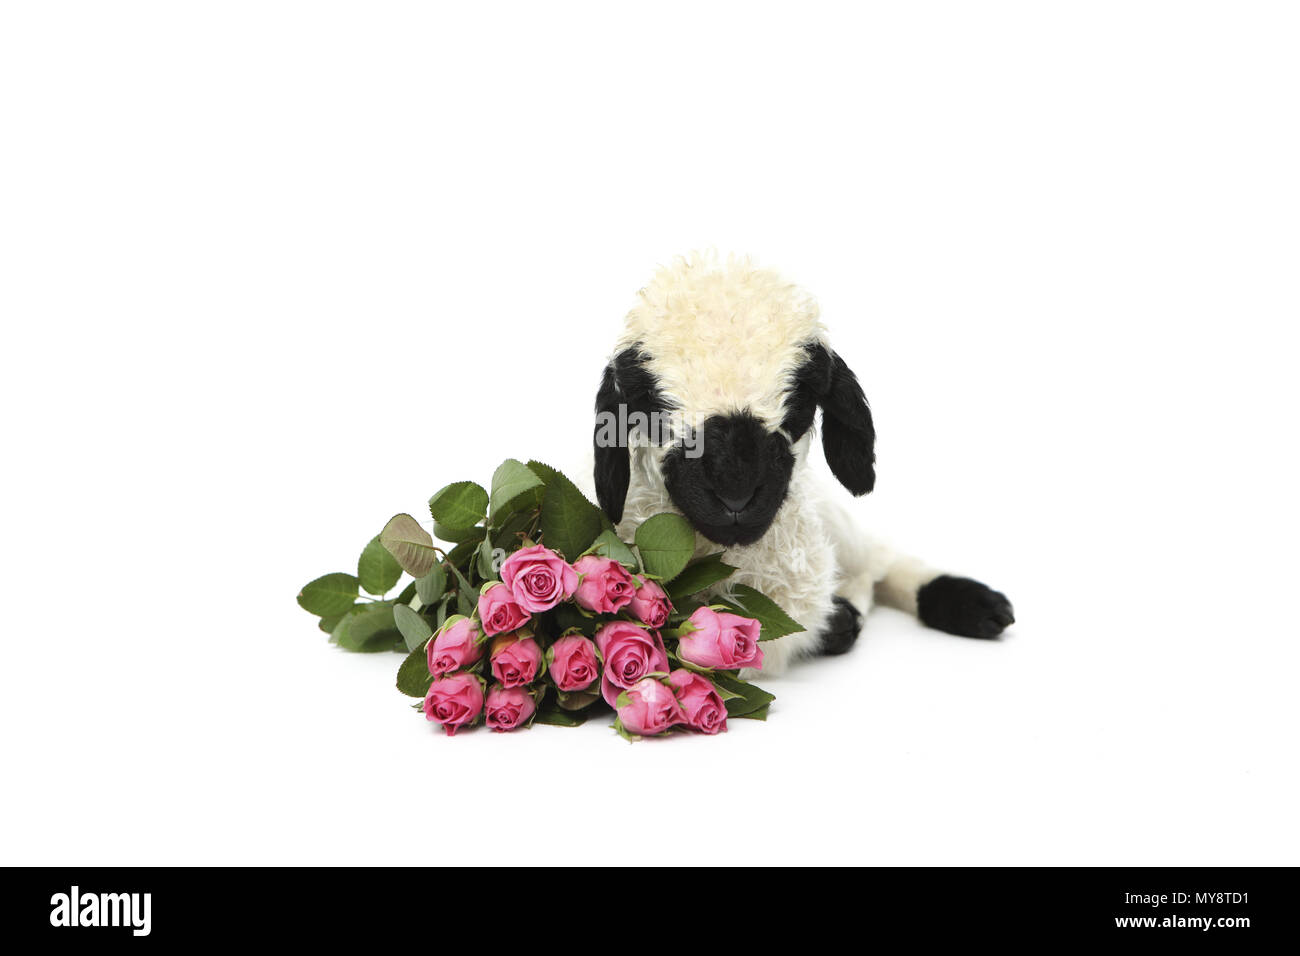 Valais Blacknose Sheep. Lamb (6 days old) lying next to a pink rose bouquet. Studio picture against a pink background. Germany Stock Photo